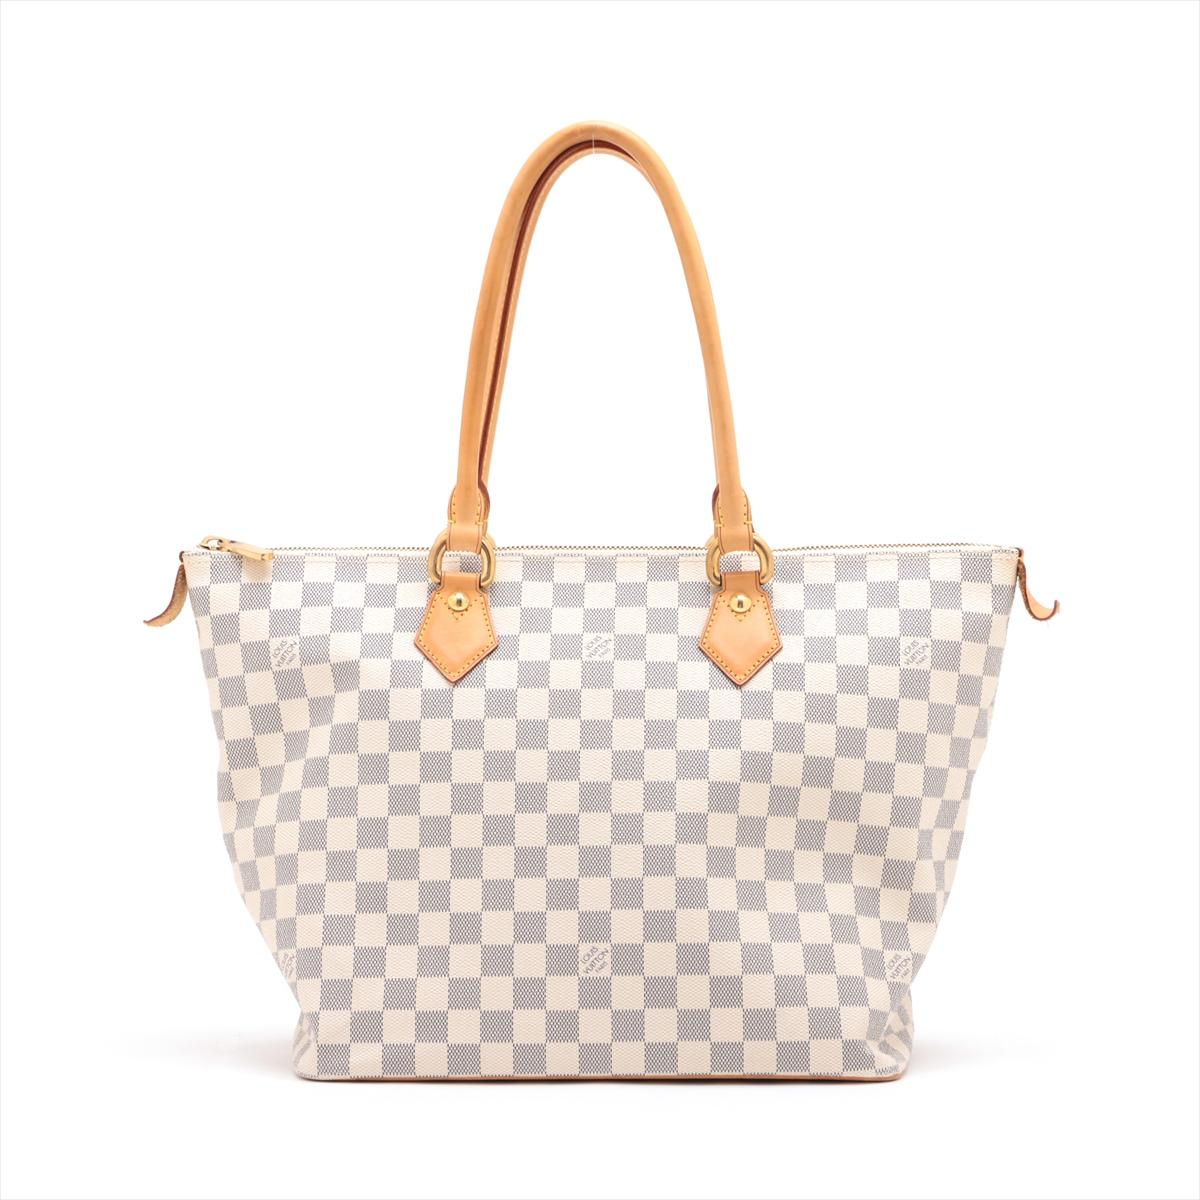 The Louis Vuitton Damier Azur Saleya MM is a sophisticated and versatile tote bag that exudes timeless elegance. Crafted from the iconic Damier Azur coated canvas, the bag showcases Louis Vuitton's signature checkered pattern in soft, refreshing